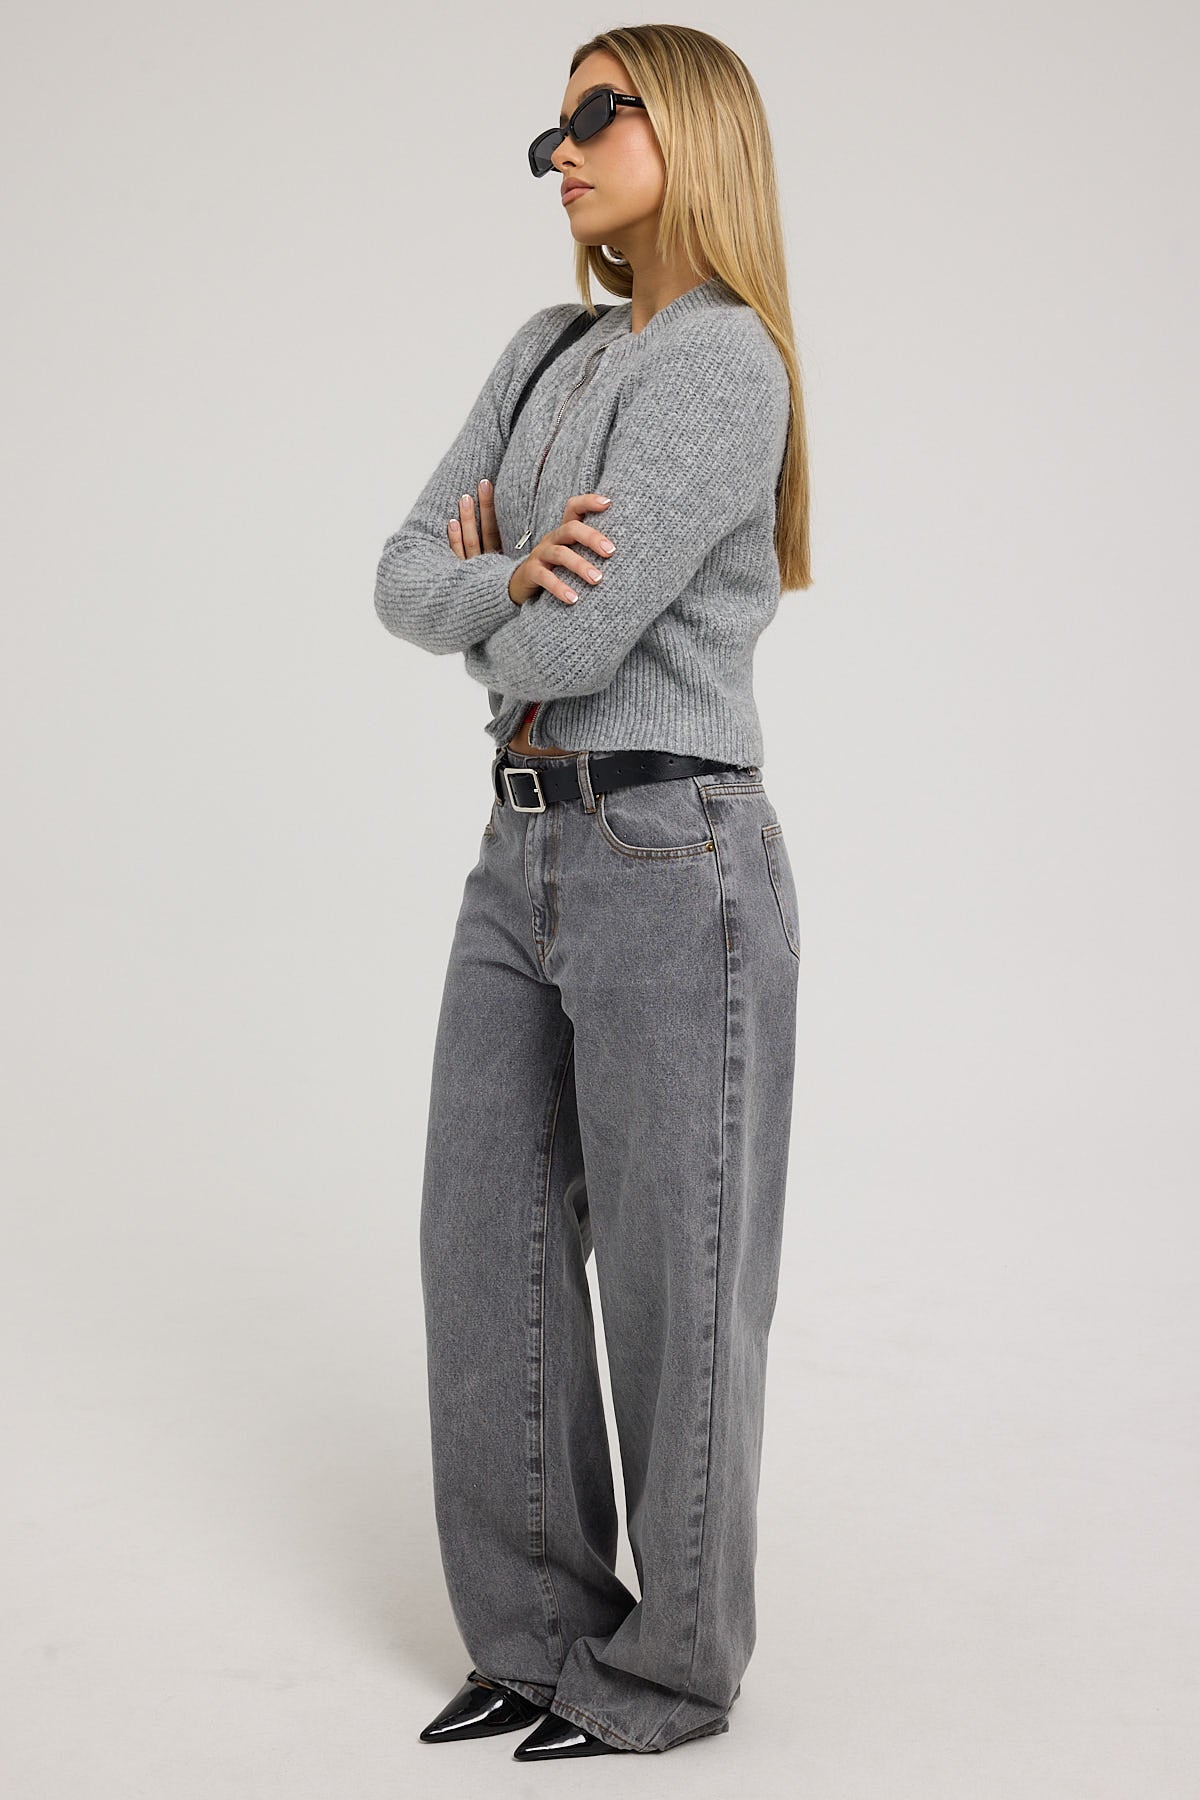 Lioness Top Model Jean Washed Grey